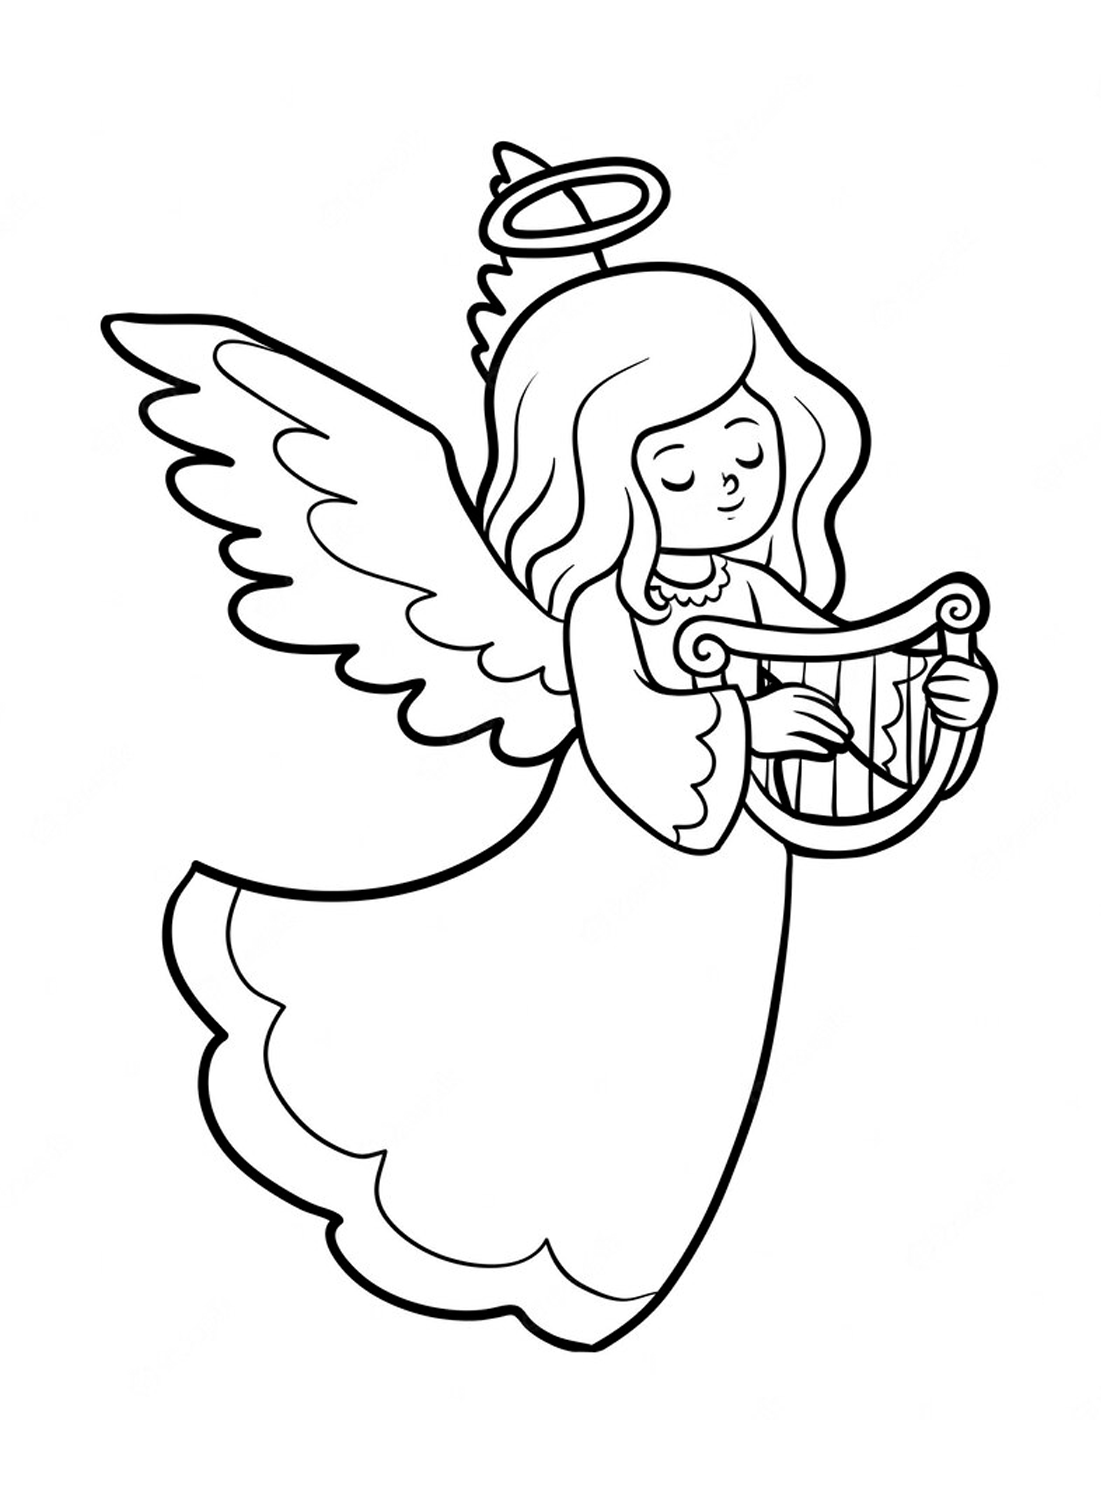 A lovely angel coloring page